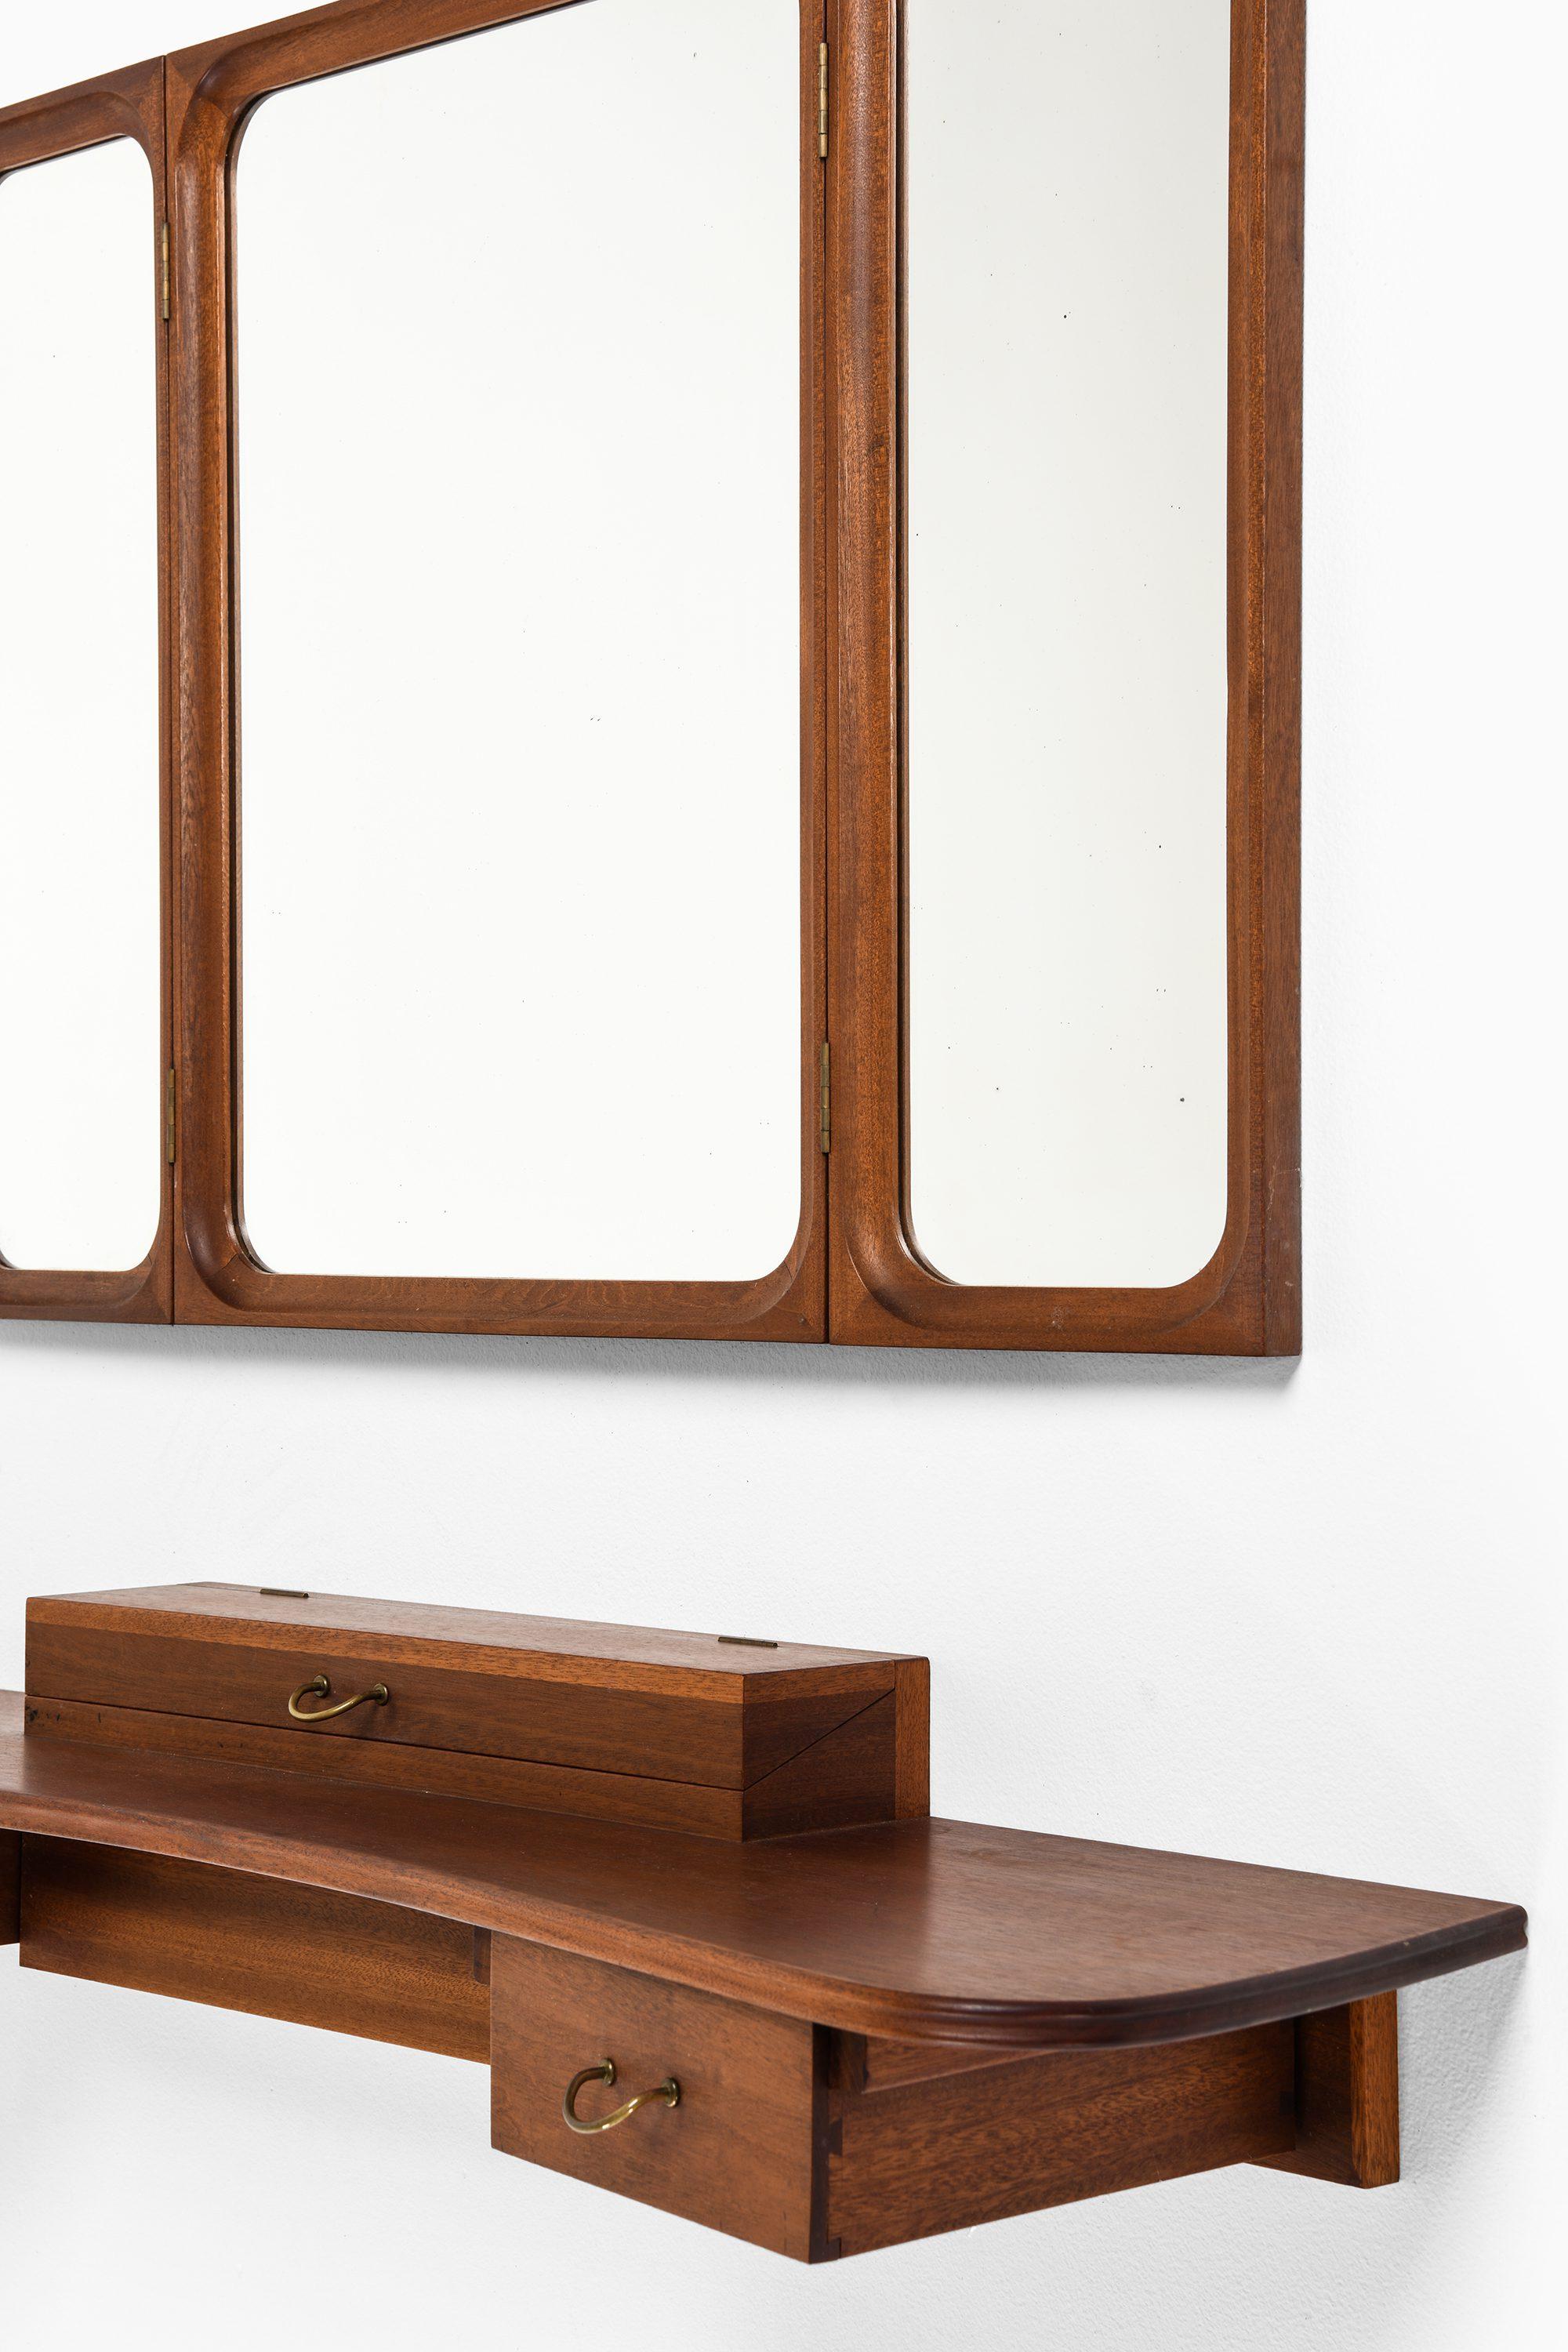 Danish Set of Vanity with Mirror in Mahogany and Brass by Frode Holm, 1950s For Sale